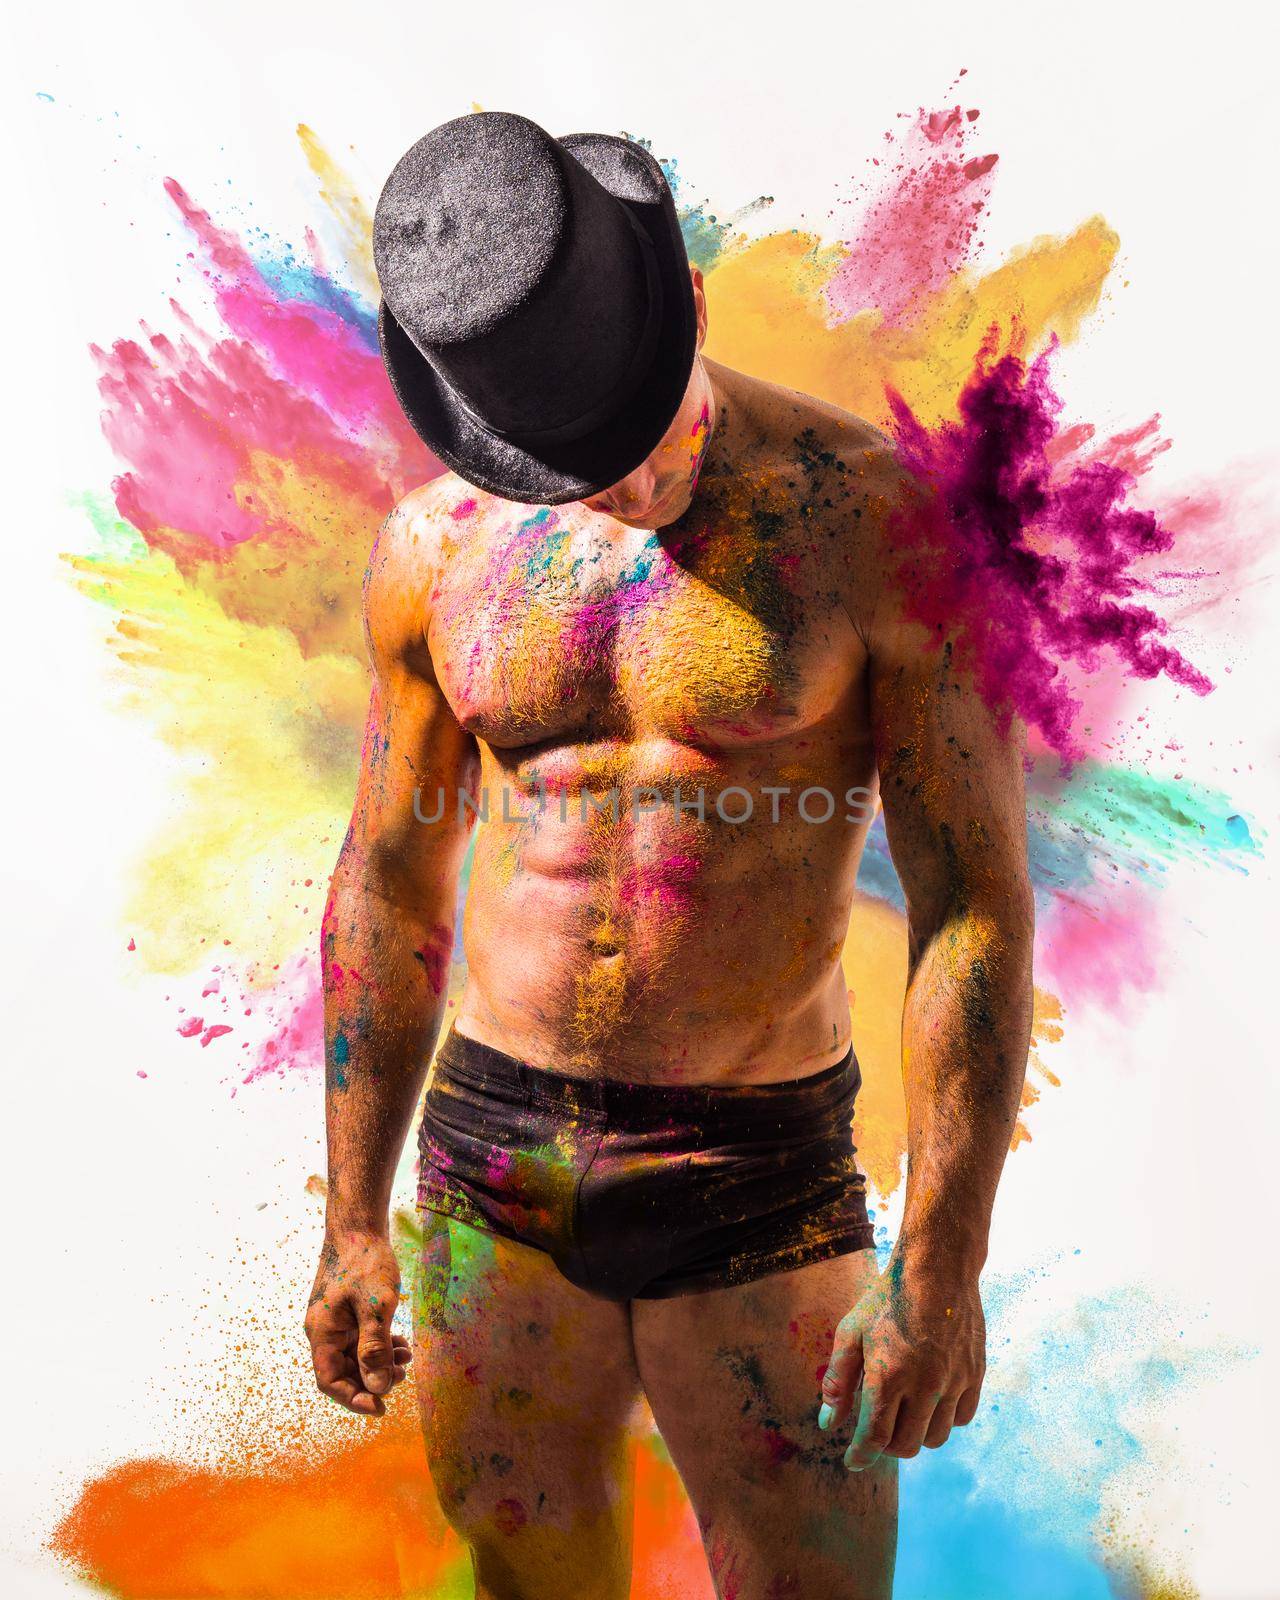 Muscular young man shirtless with skin painted with Holi colors, looking down,